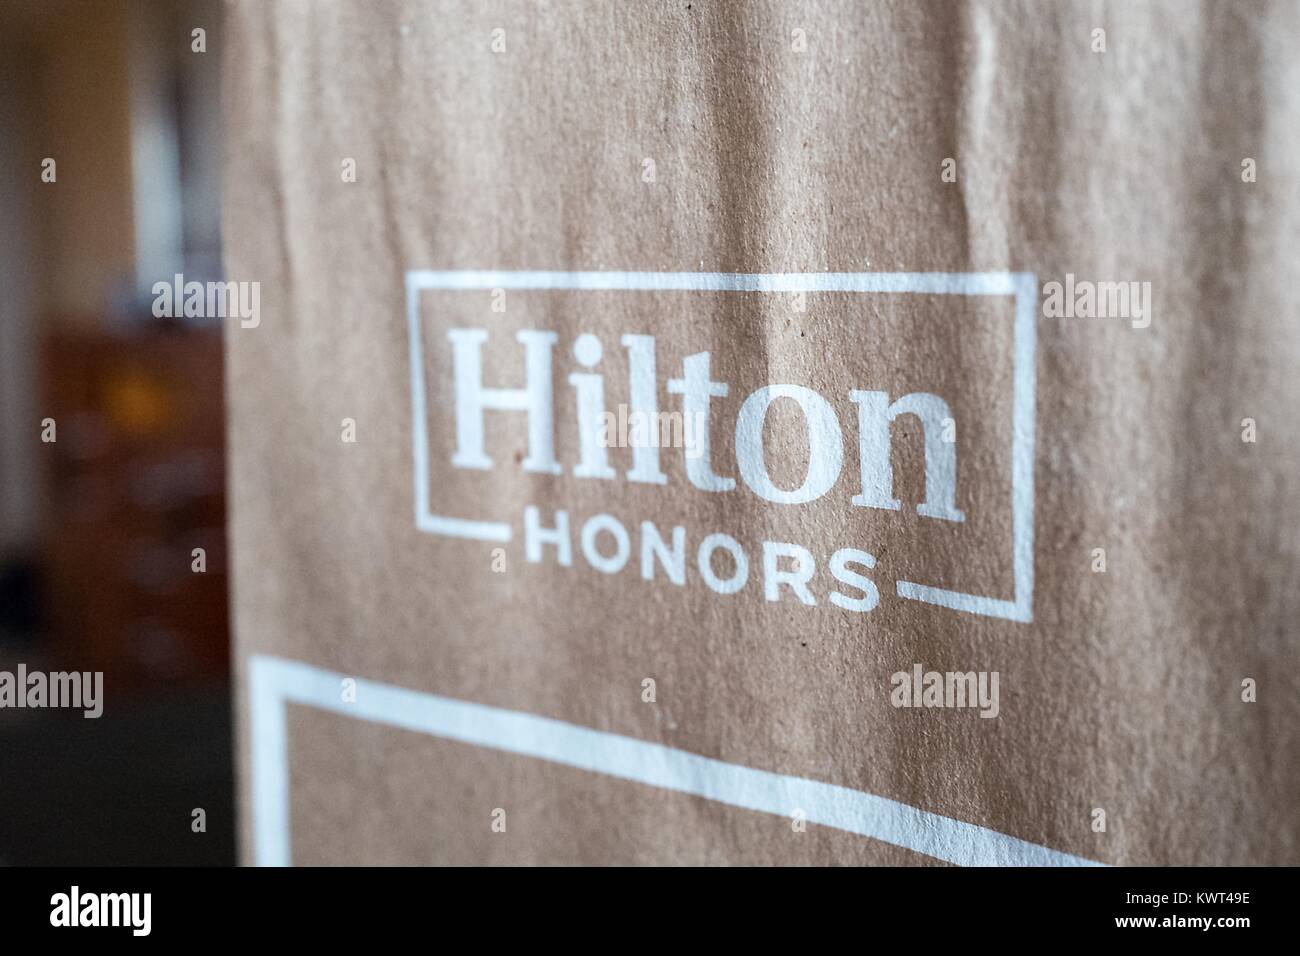 Close-up of the logo for the Hilton Honors program, part of the Hilton hotel brand, New York City, New York, September 14, 2017. Stock Photo